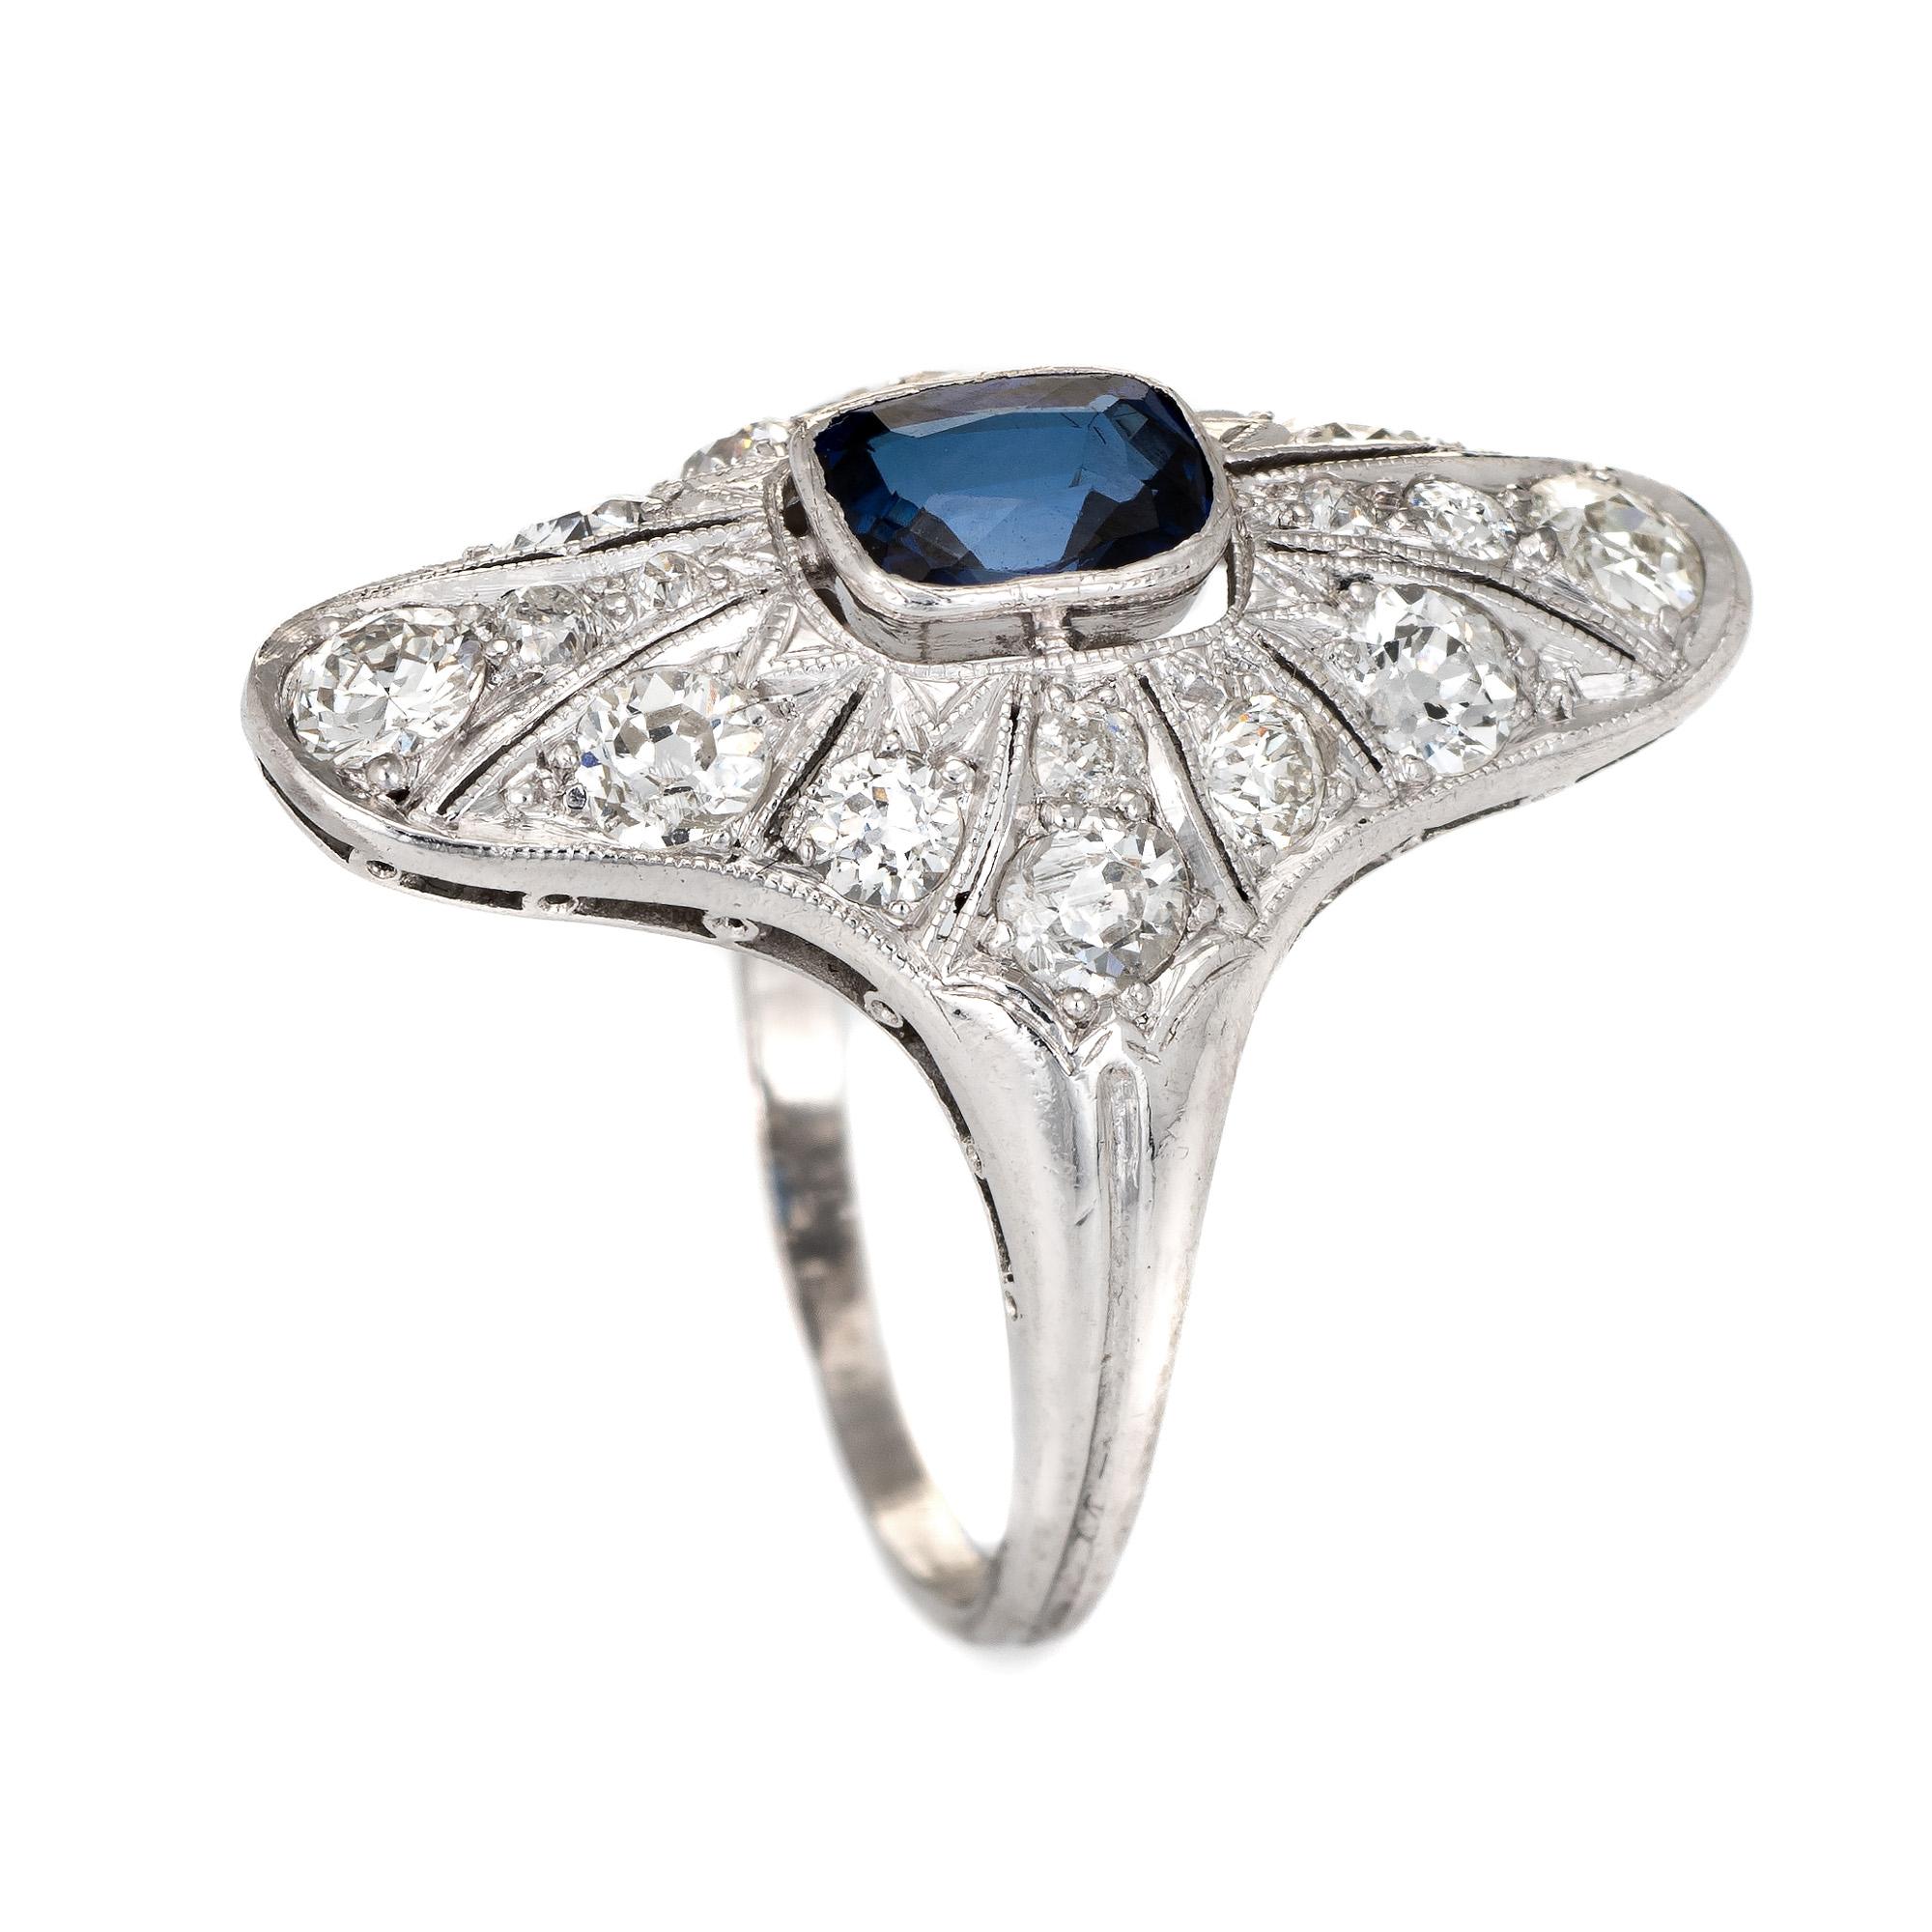 Finely detailed antique Edwardian era ring (circa 1910s) crafted in 900 platinum. 

Centrally mounted estimated 0.50 carat cushion cut blue sapphire is accented with an estimated 1.42 carats of old mine and single cut diamonds (estimated at I-J